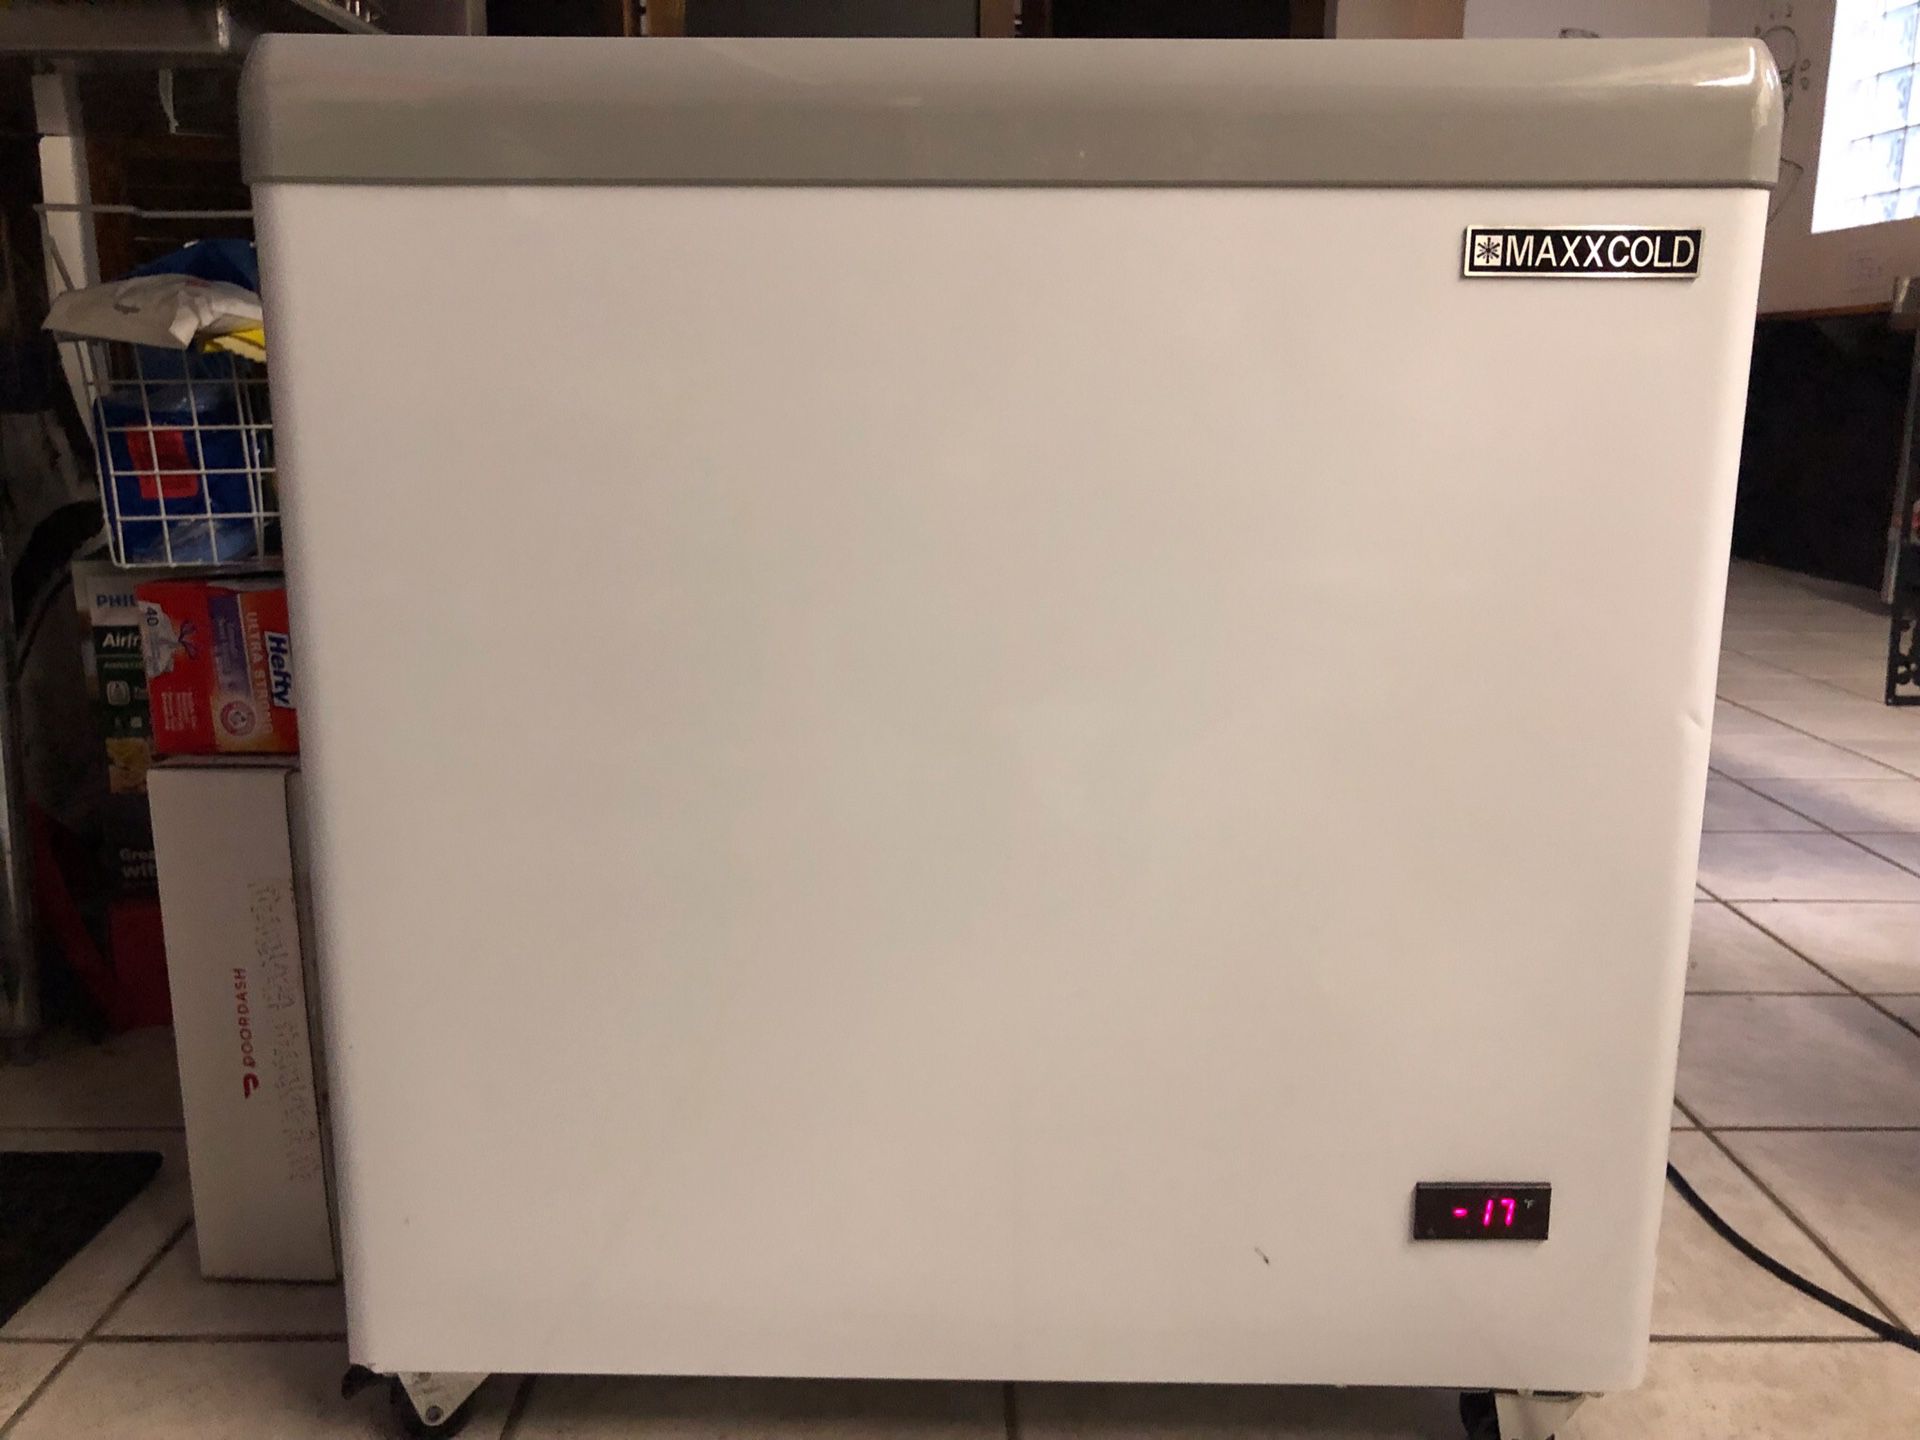 Maxx Cold Freezer (personal or commercial)